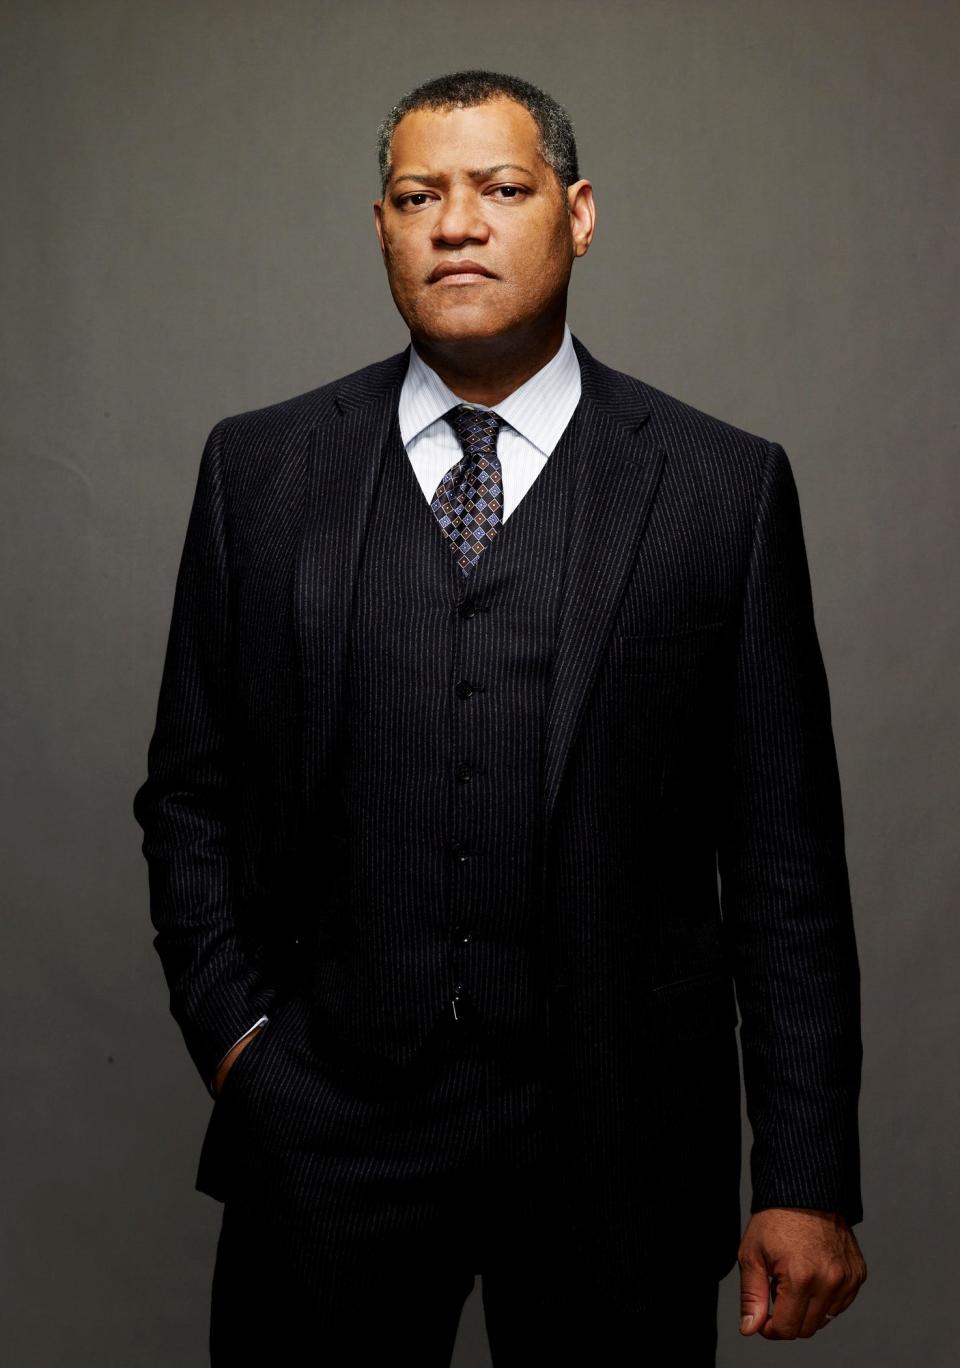 Oscar-nominated actor Laurence Fishburne will attend the 2023 Freep Film Festival